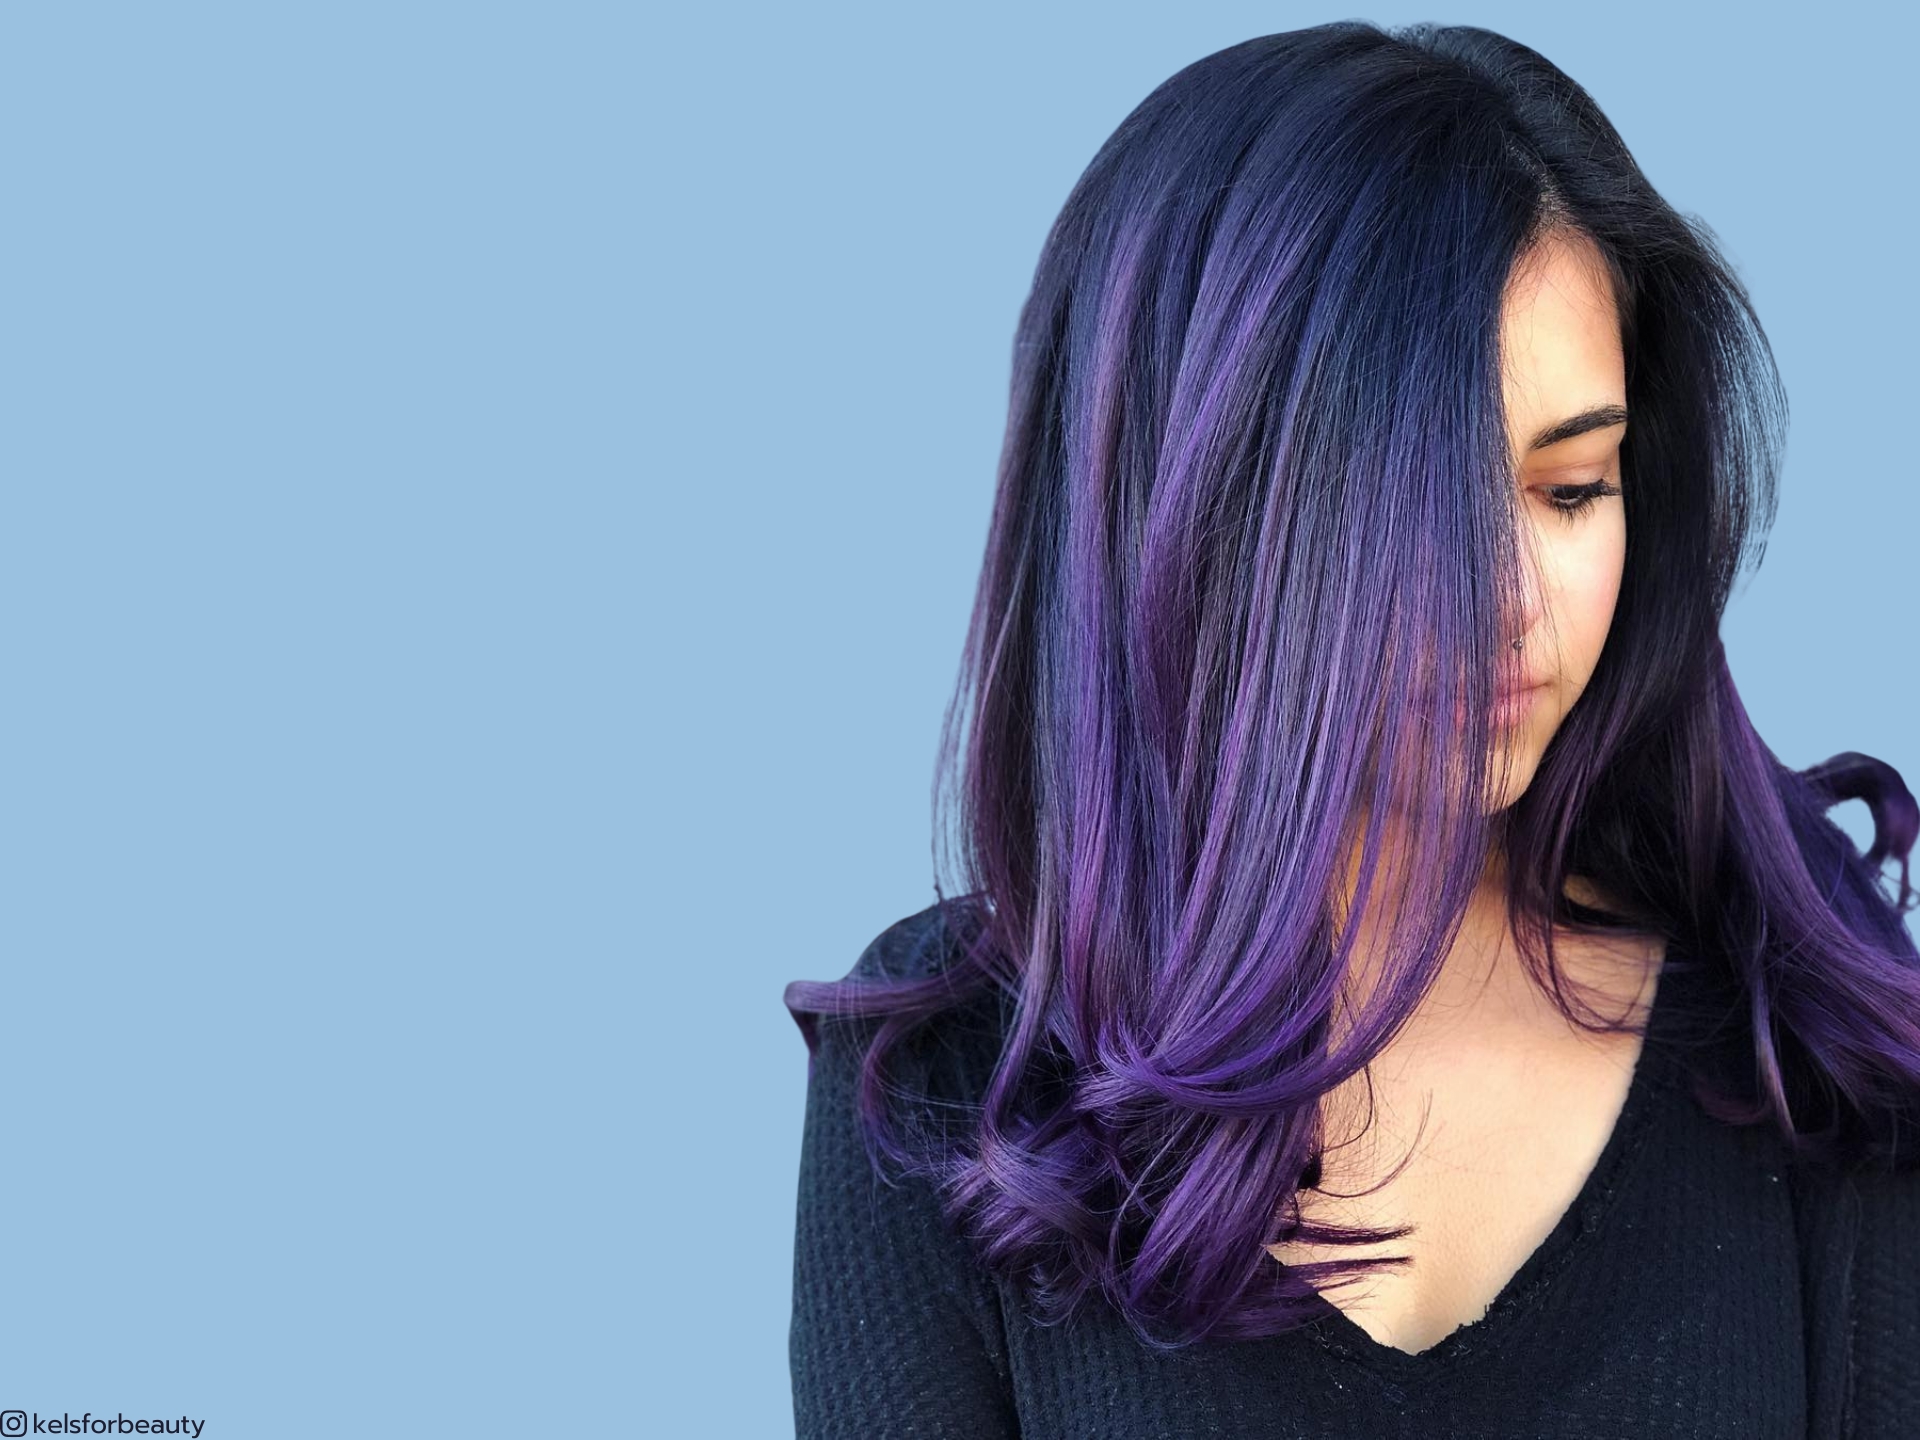 Mesmerizing Midnight Purple Hair Styles Will Be All The Rage This Year